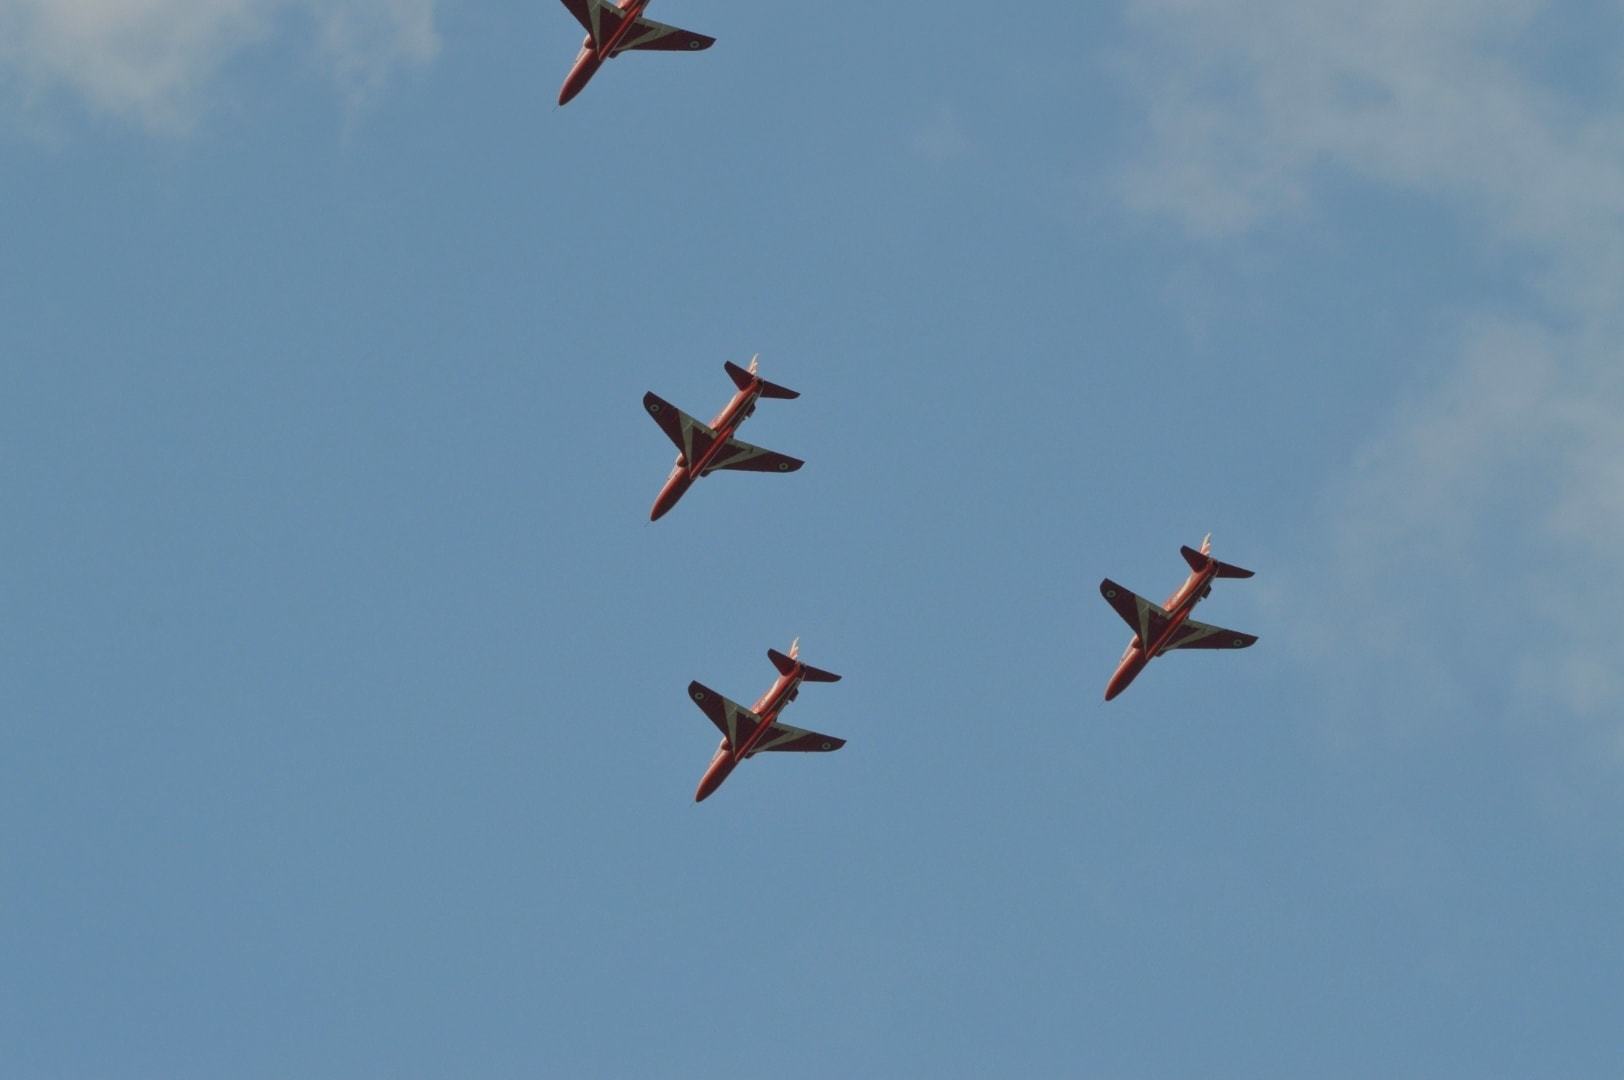 Hereford Times Camera Club member Les Carr took this picture as the Red Arrows flew over Bromyard, Herefordshire